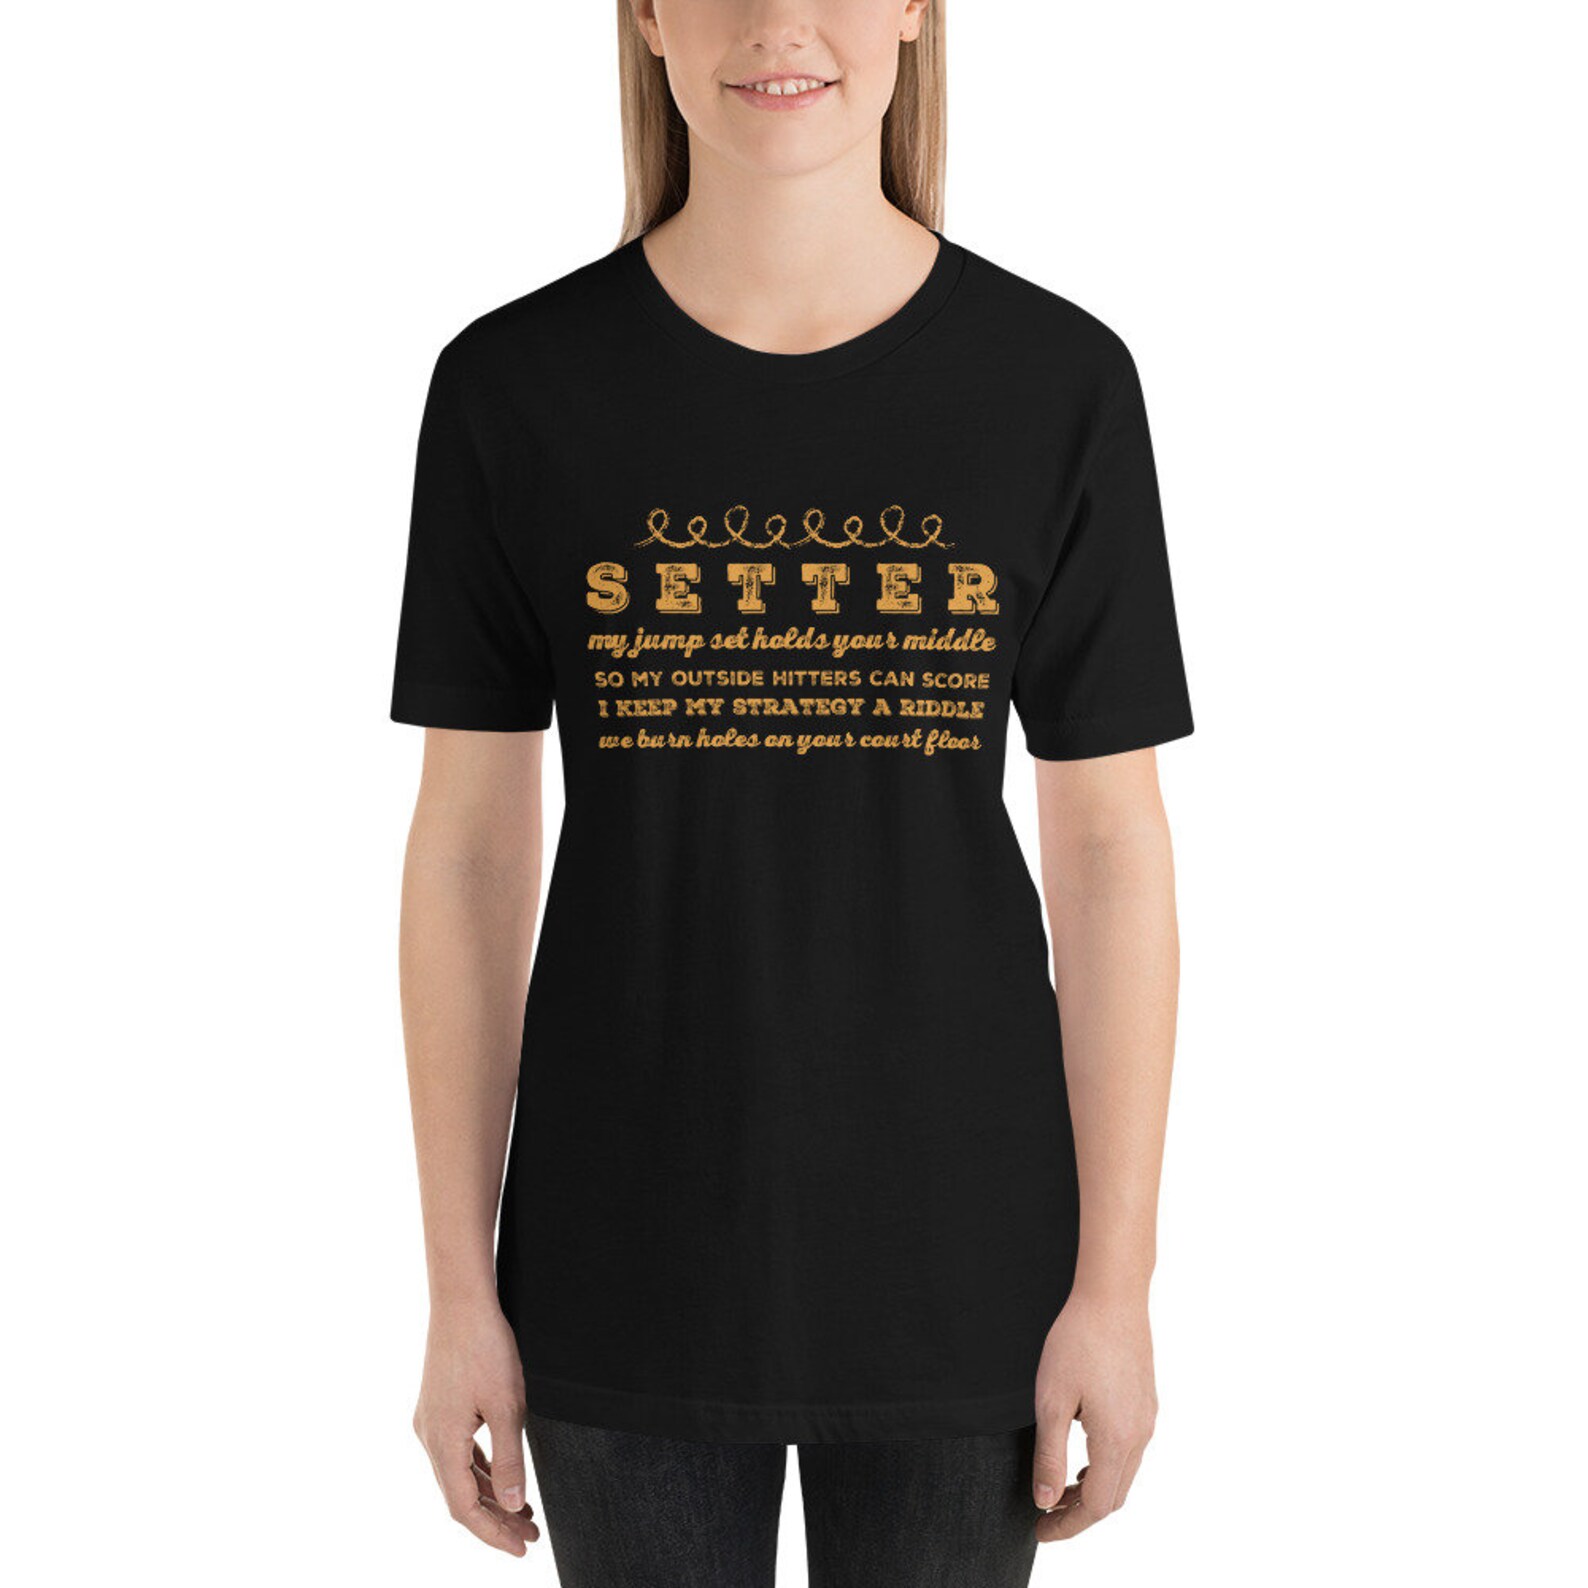 My Jump Set Holds Your Middle
So My Outside Hitter Can Score
I Keep My Strategy A Riddle
We Burn Holes In Your Court Floor is one of my popular volleyball setting quotes on tshirts sold on Etsy.